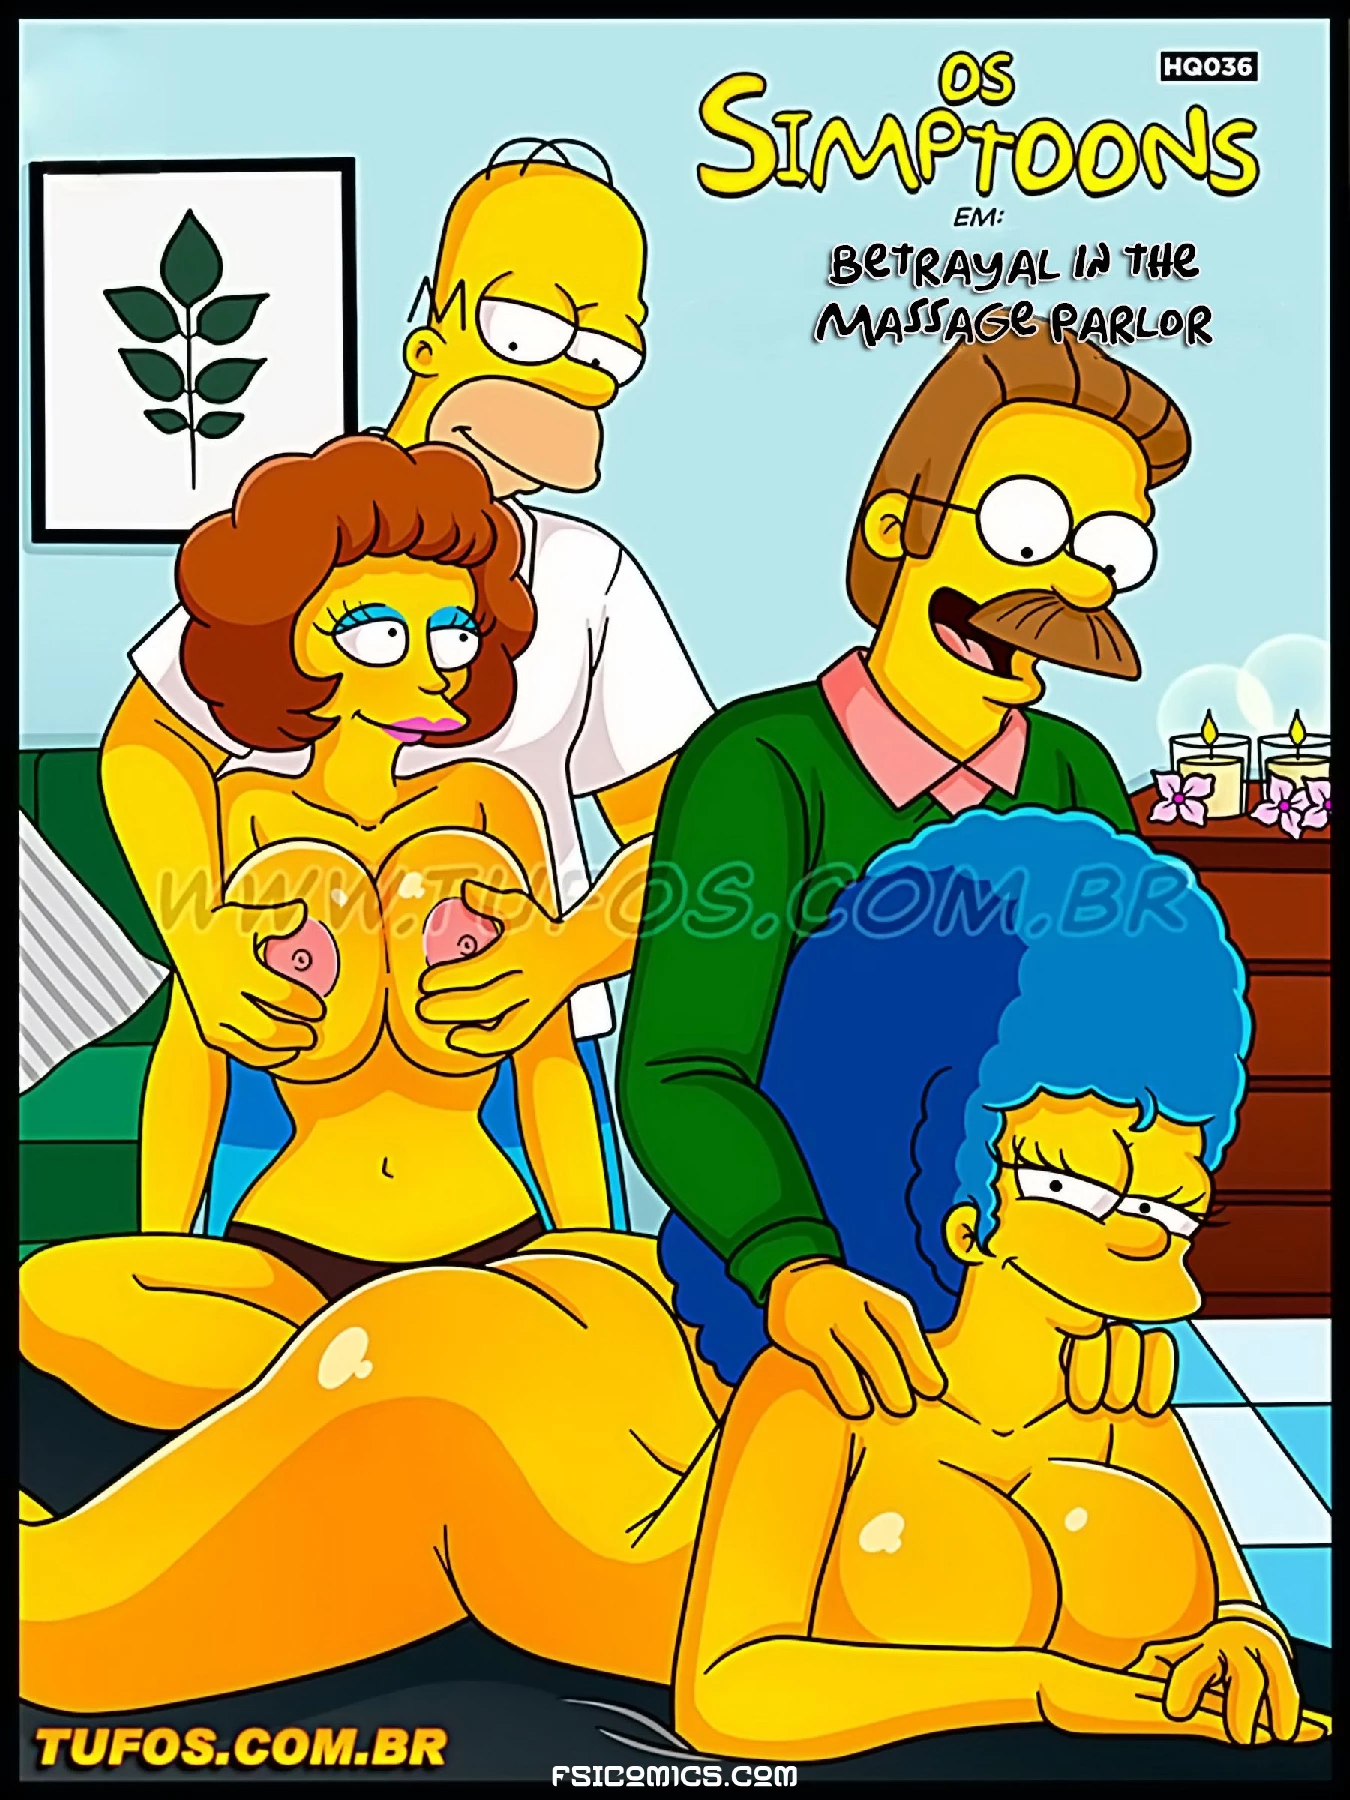 The Simpsons Chapter 36 – Betrayal in the Massage Parlor – WC TF - 31 - FSIComics